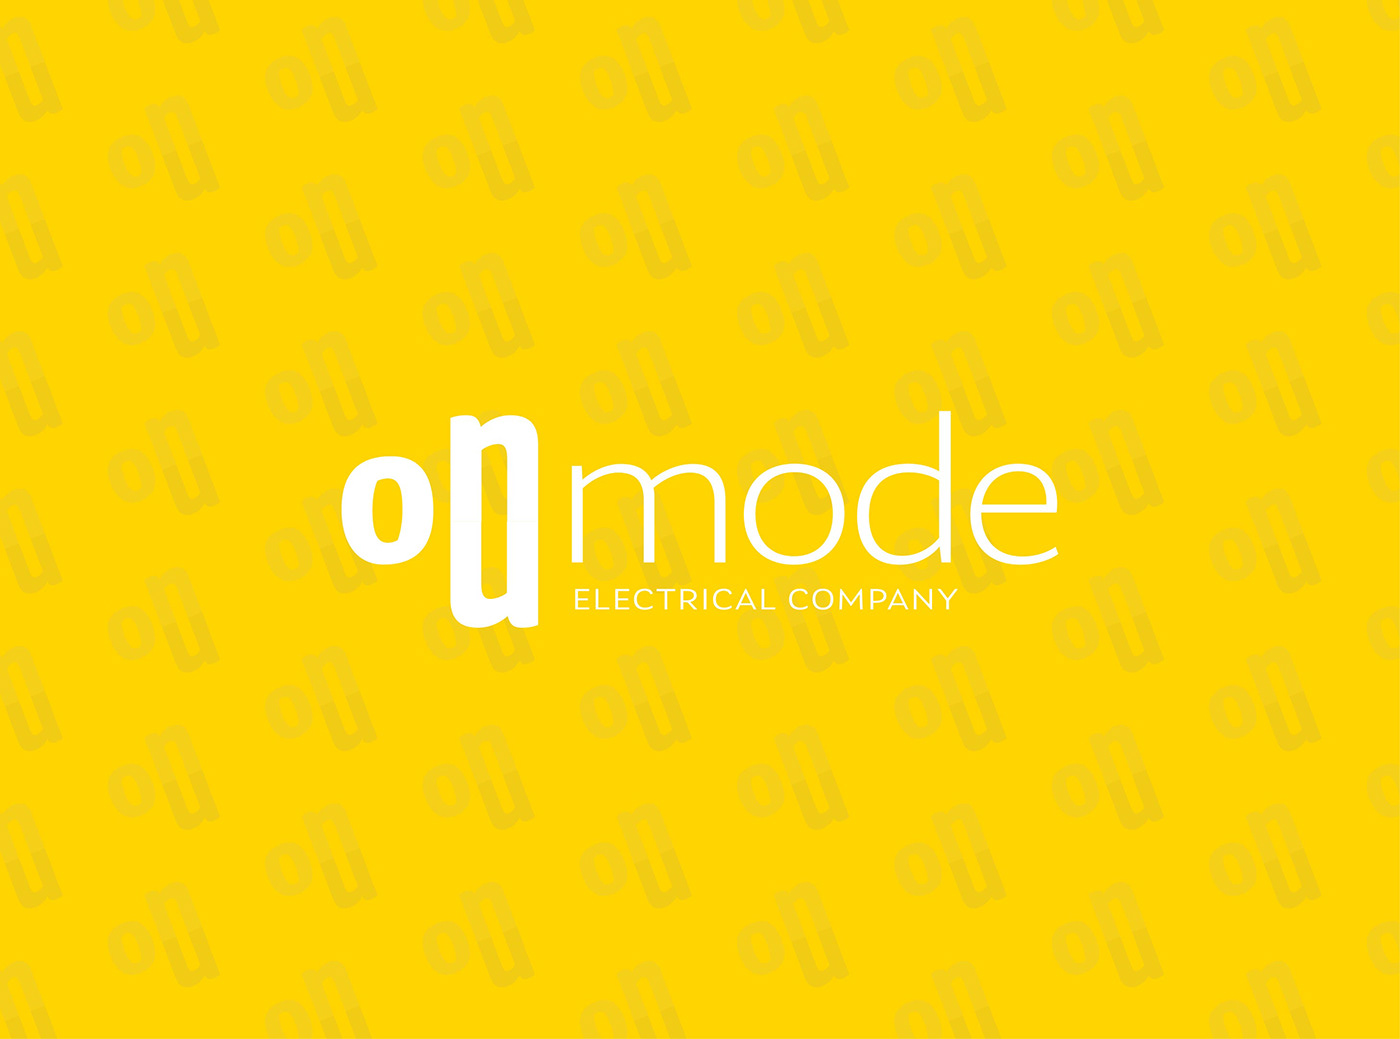 Cover On Mode - Electrical Company Branding Identity Project